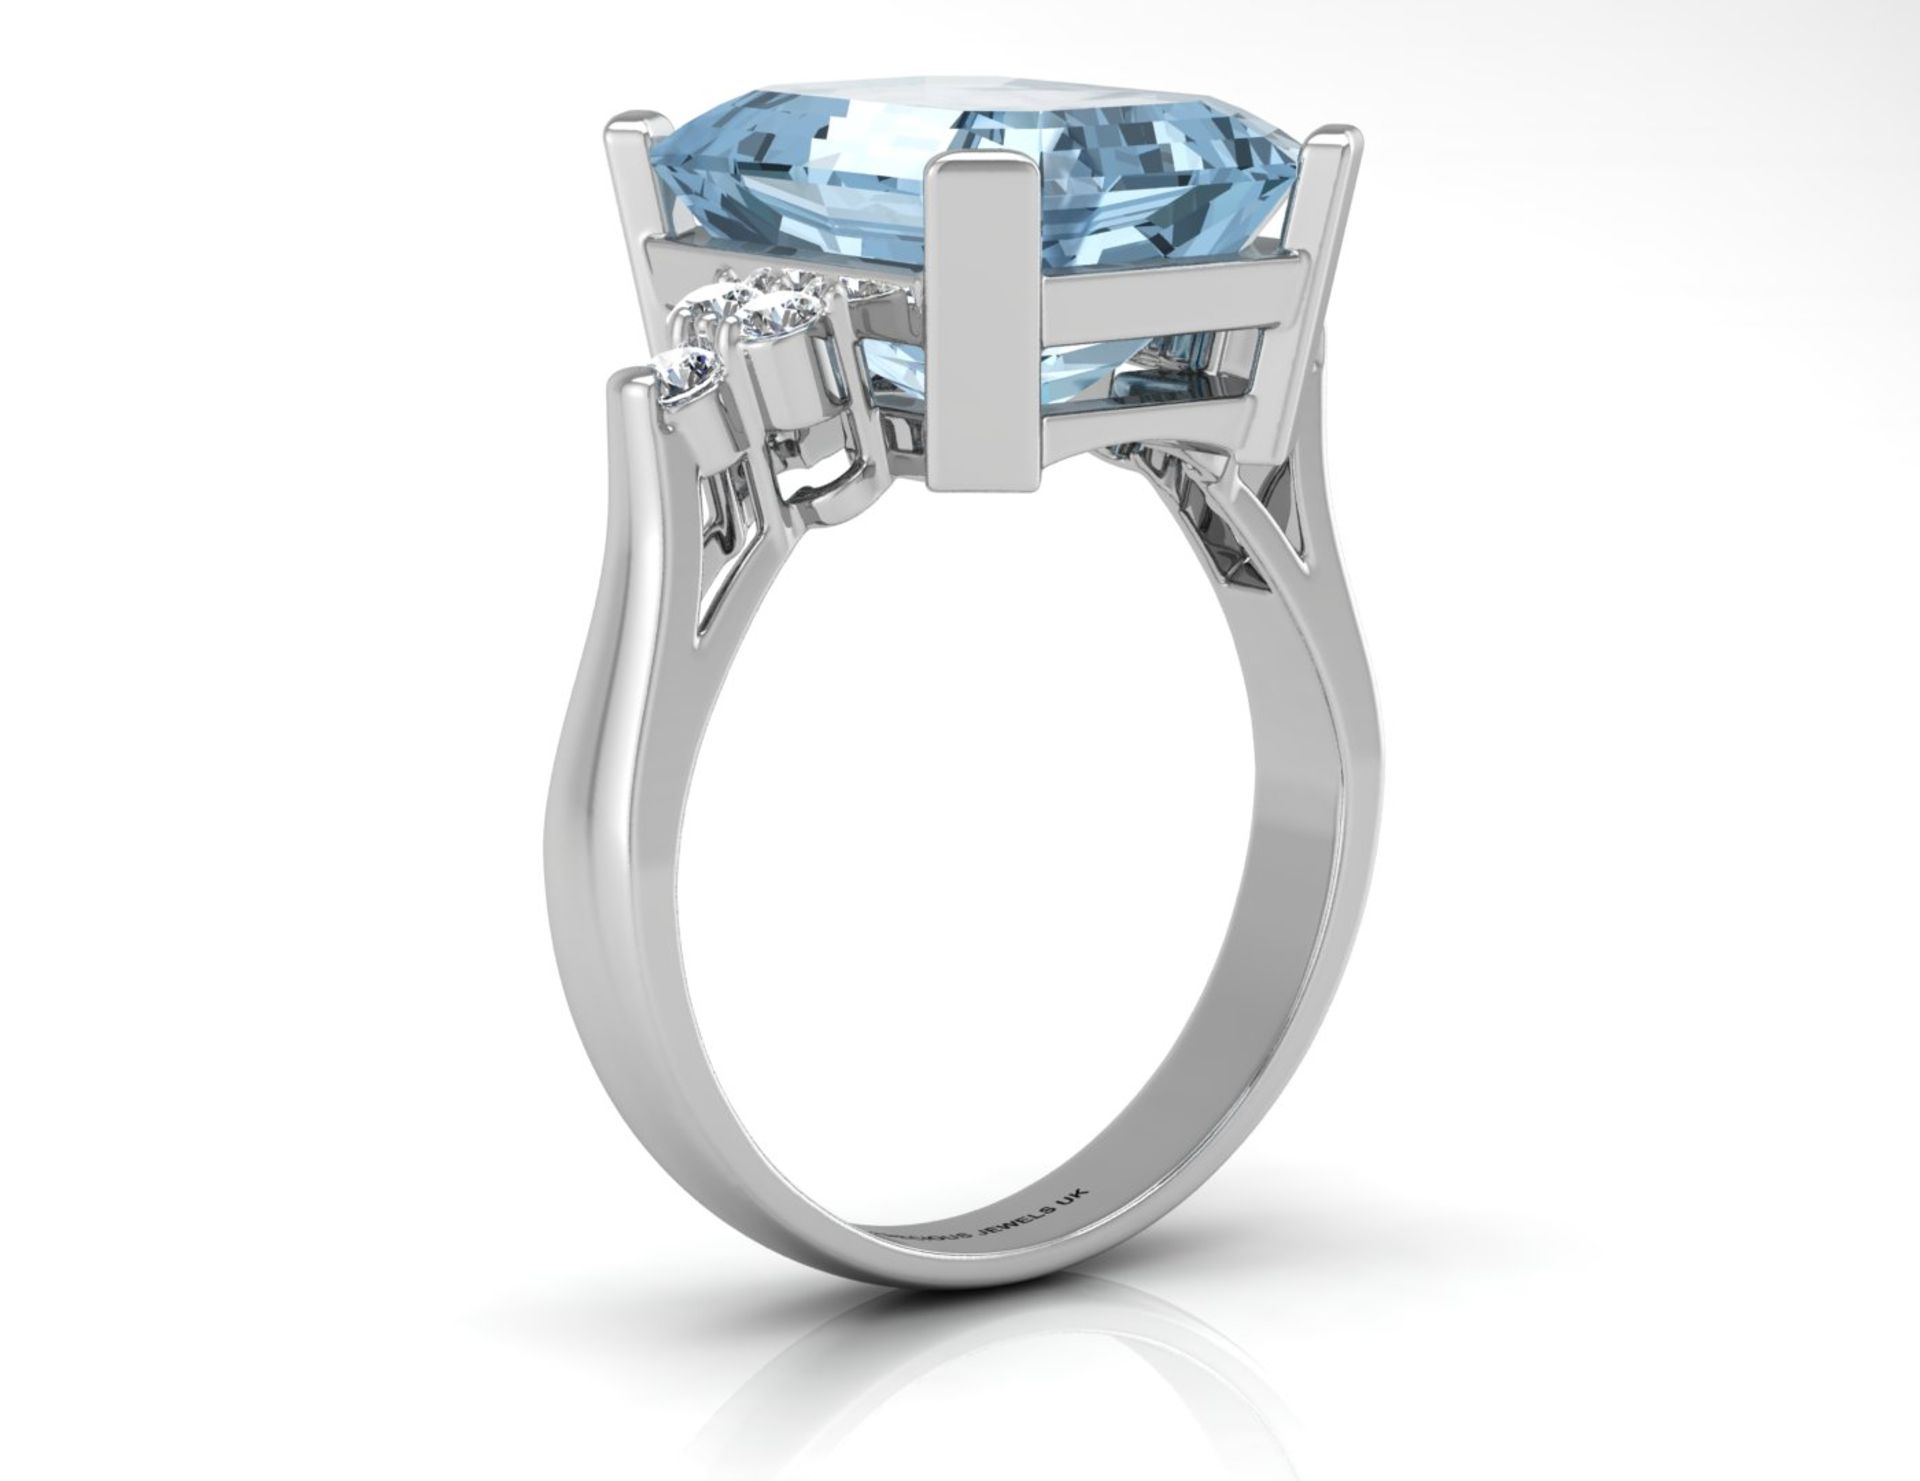 9ct White Gold Diamond And Blue Topaz Ring 0.18 Carats - Valued by AGI £1,645.00 - This stunning - Image 2 of 4